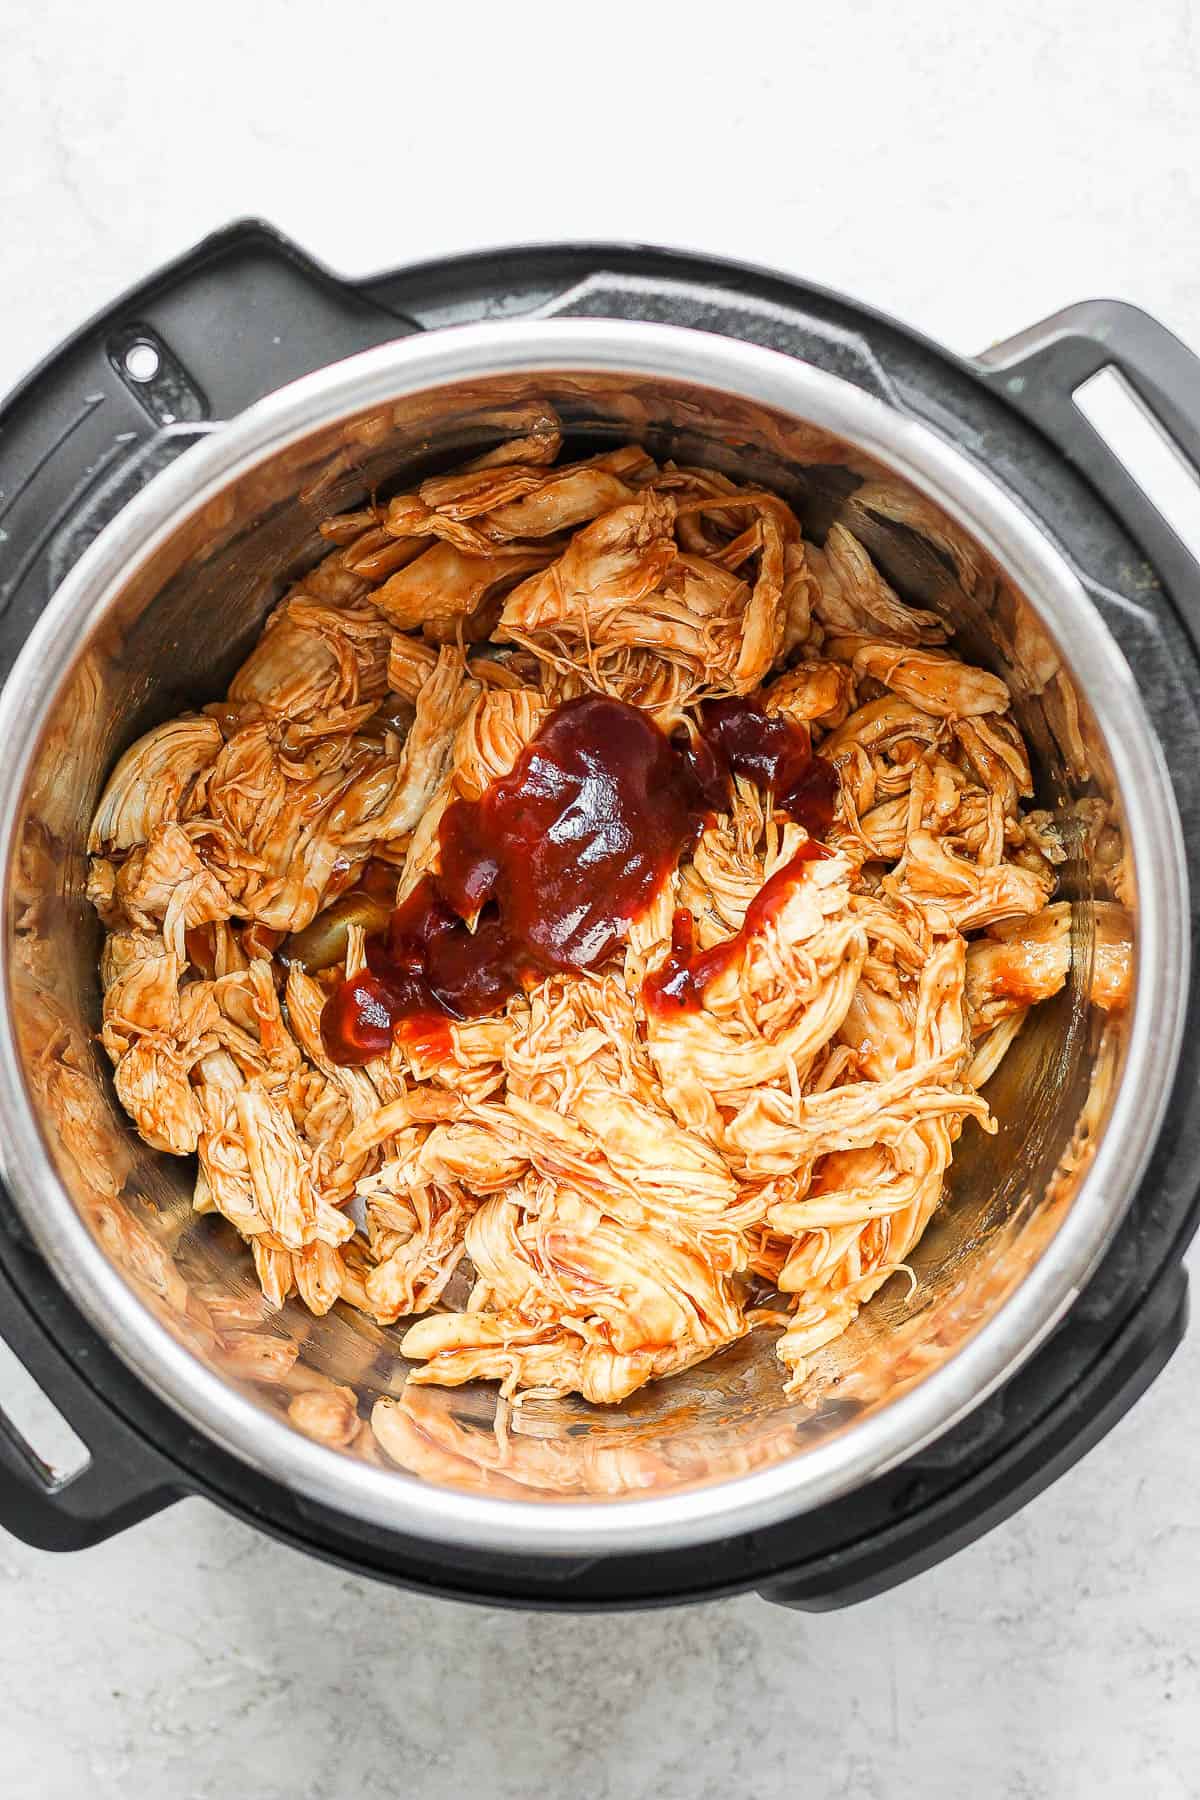 Top shot of shredded bbq chicken in an Instant Pot.